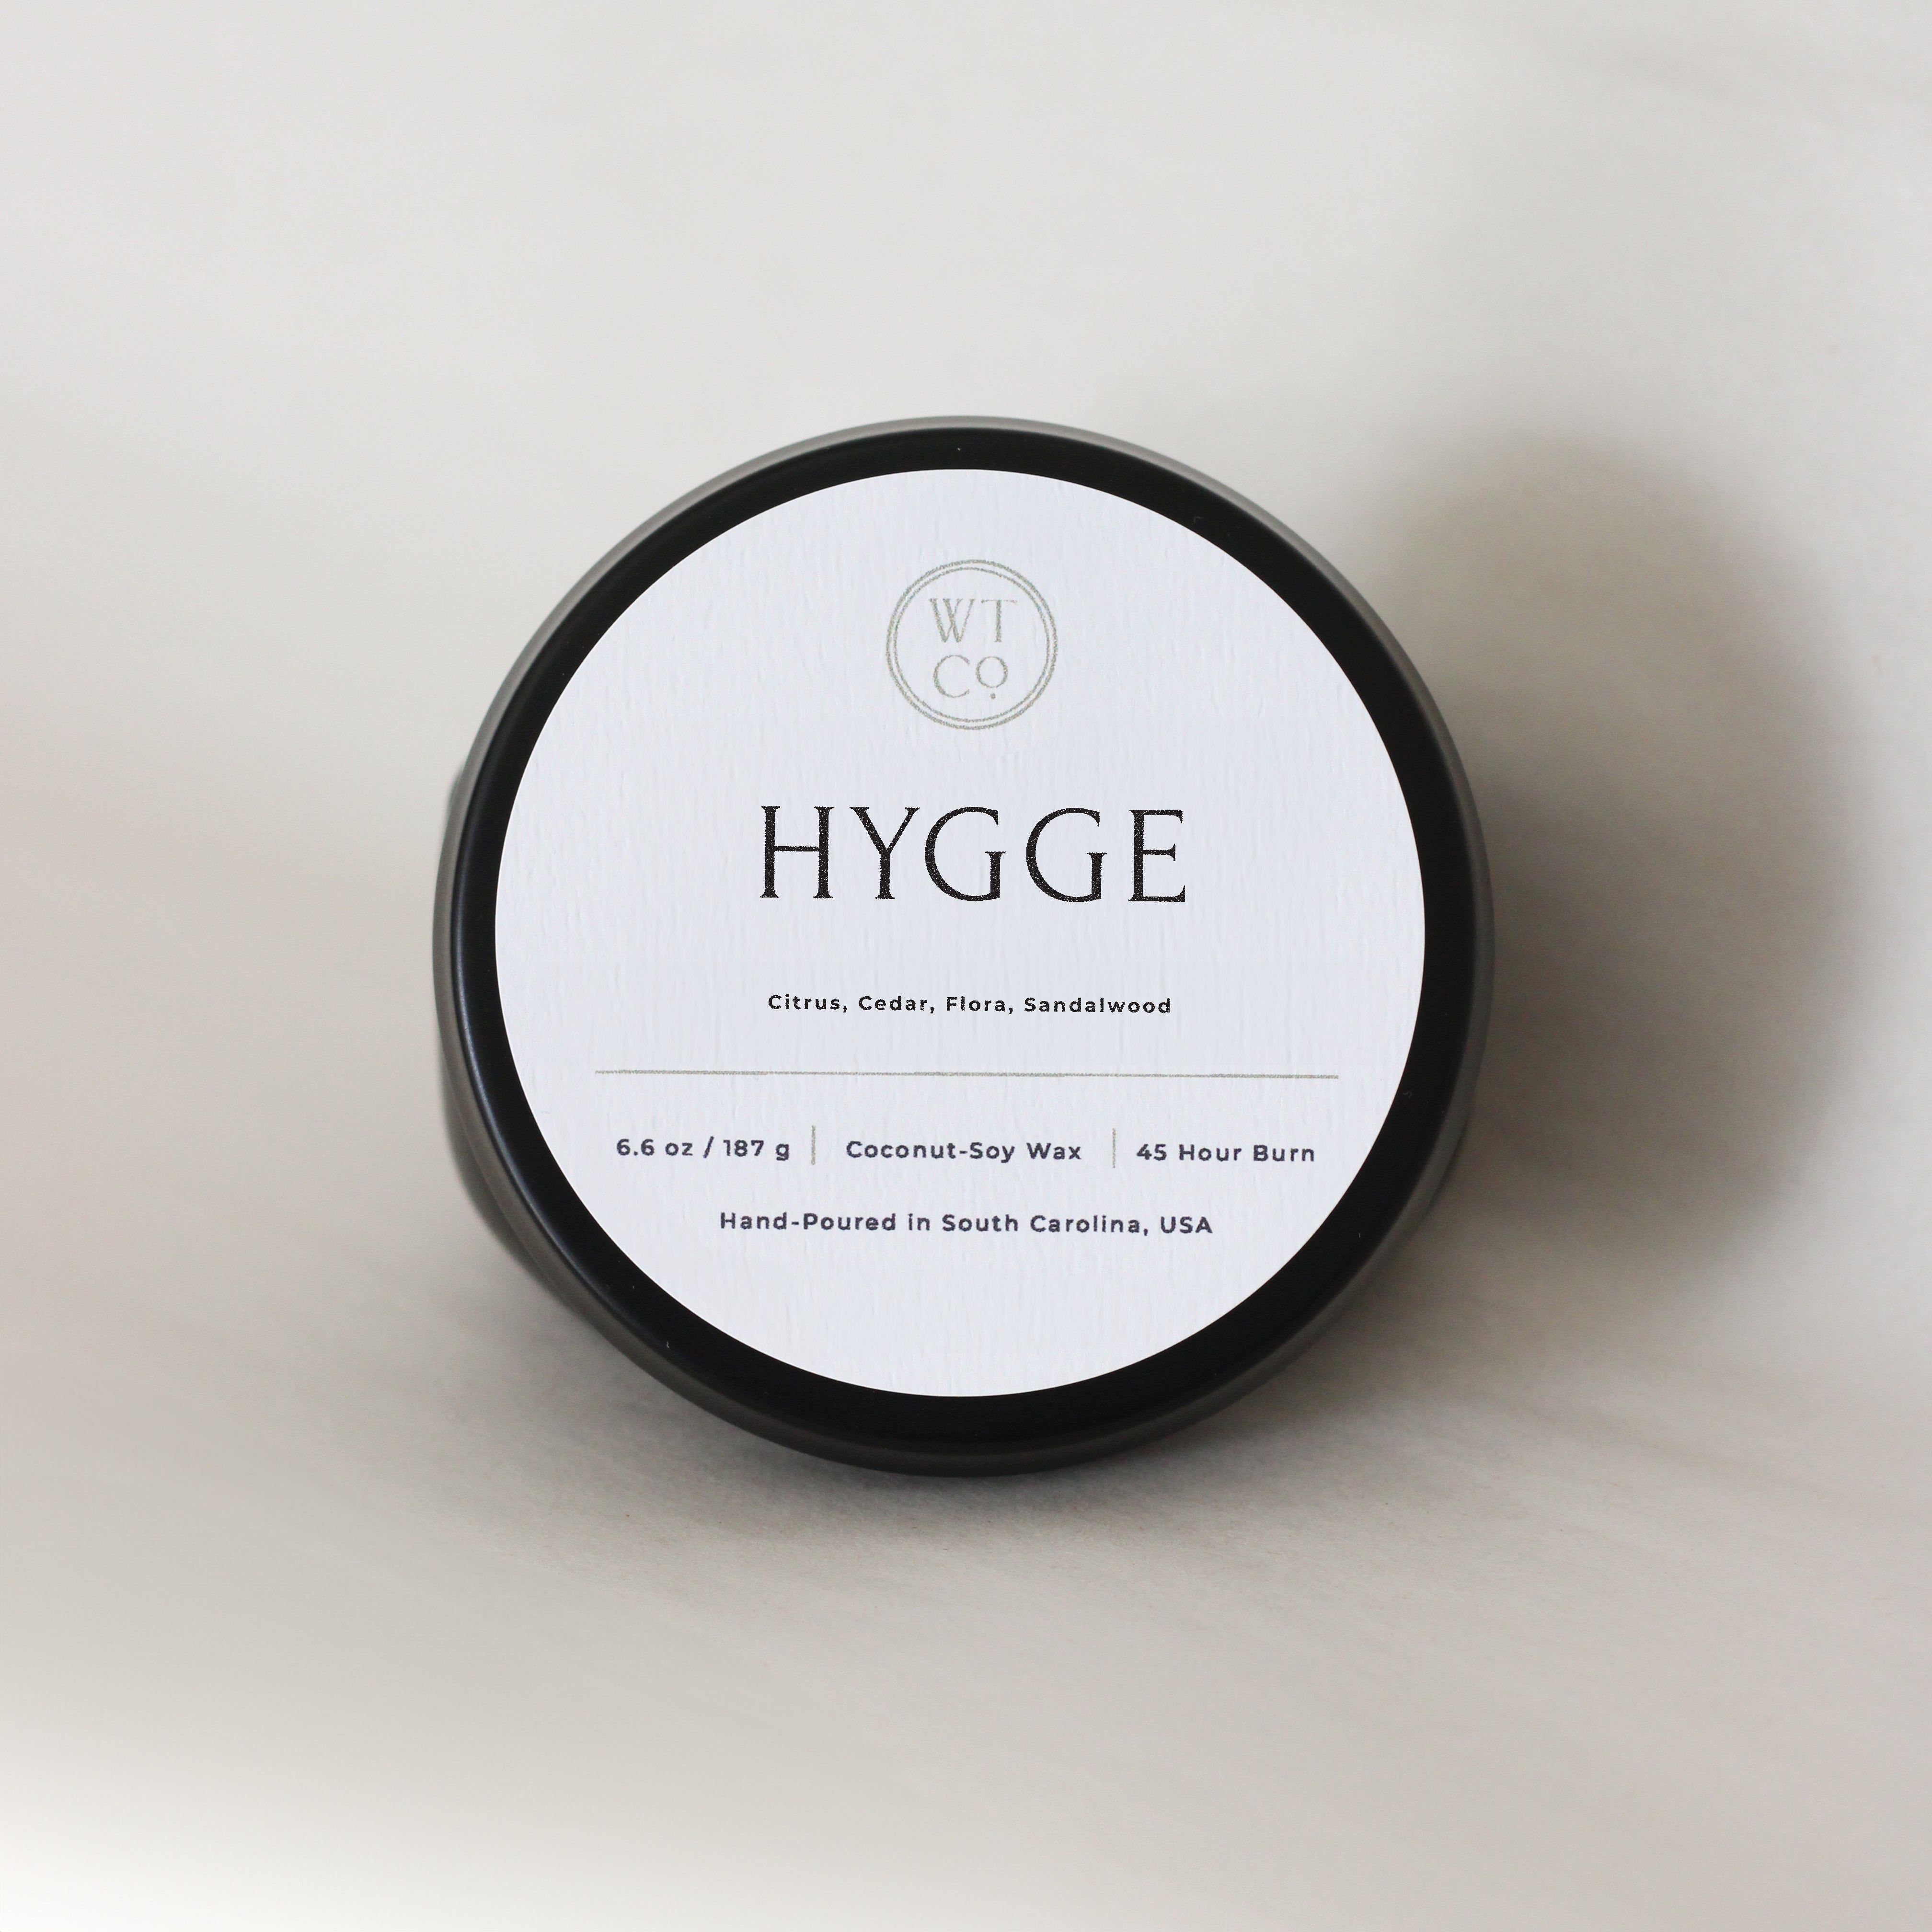 Hygge Travel Tin | Well-Taylored Co.